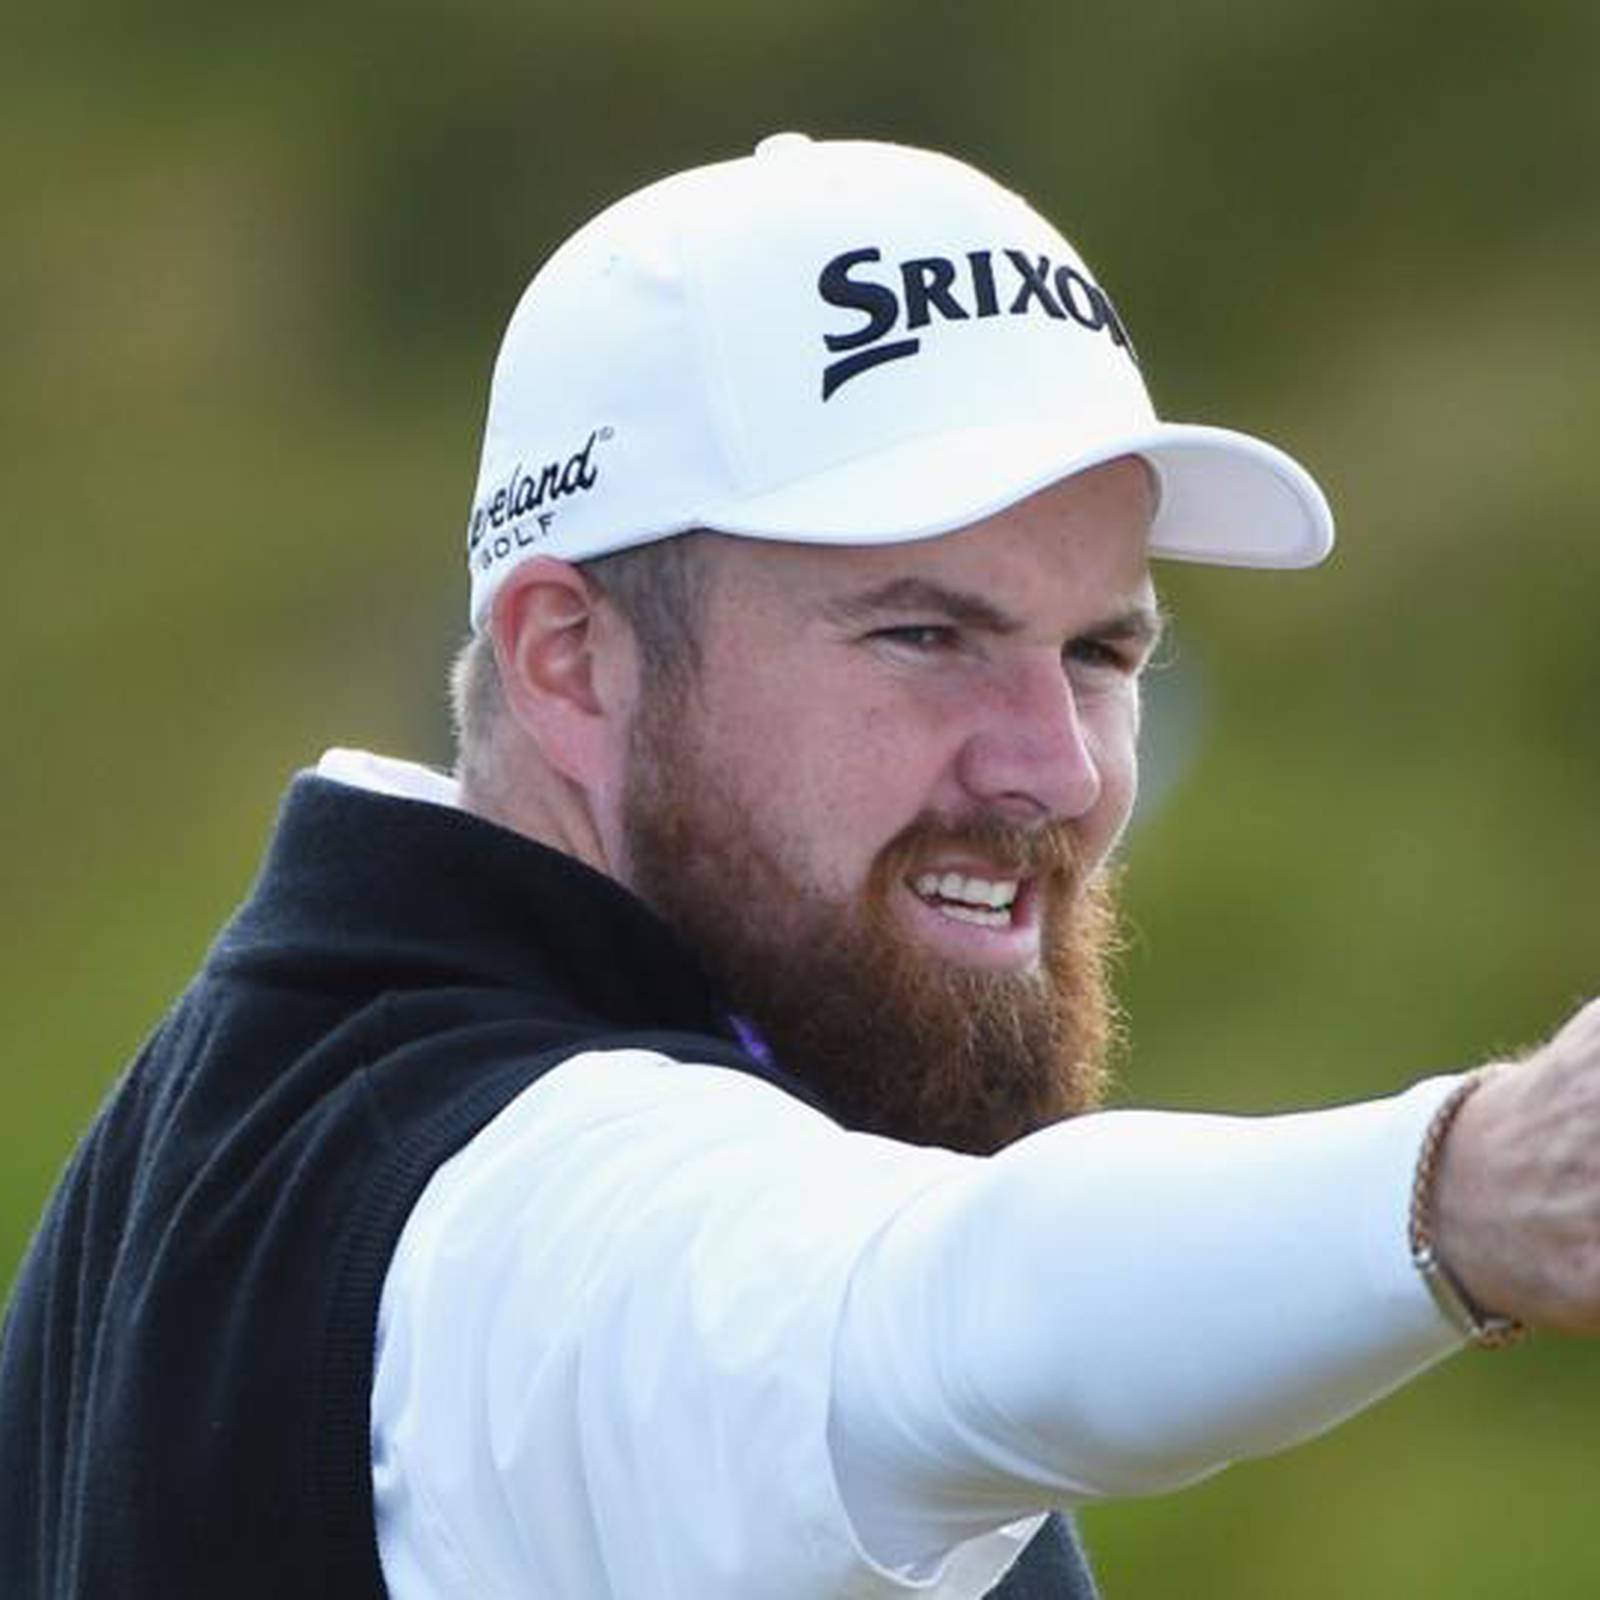 Shane Lowry loses his hat and confidence around the greens – The Irish Times